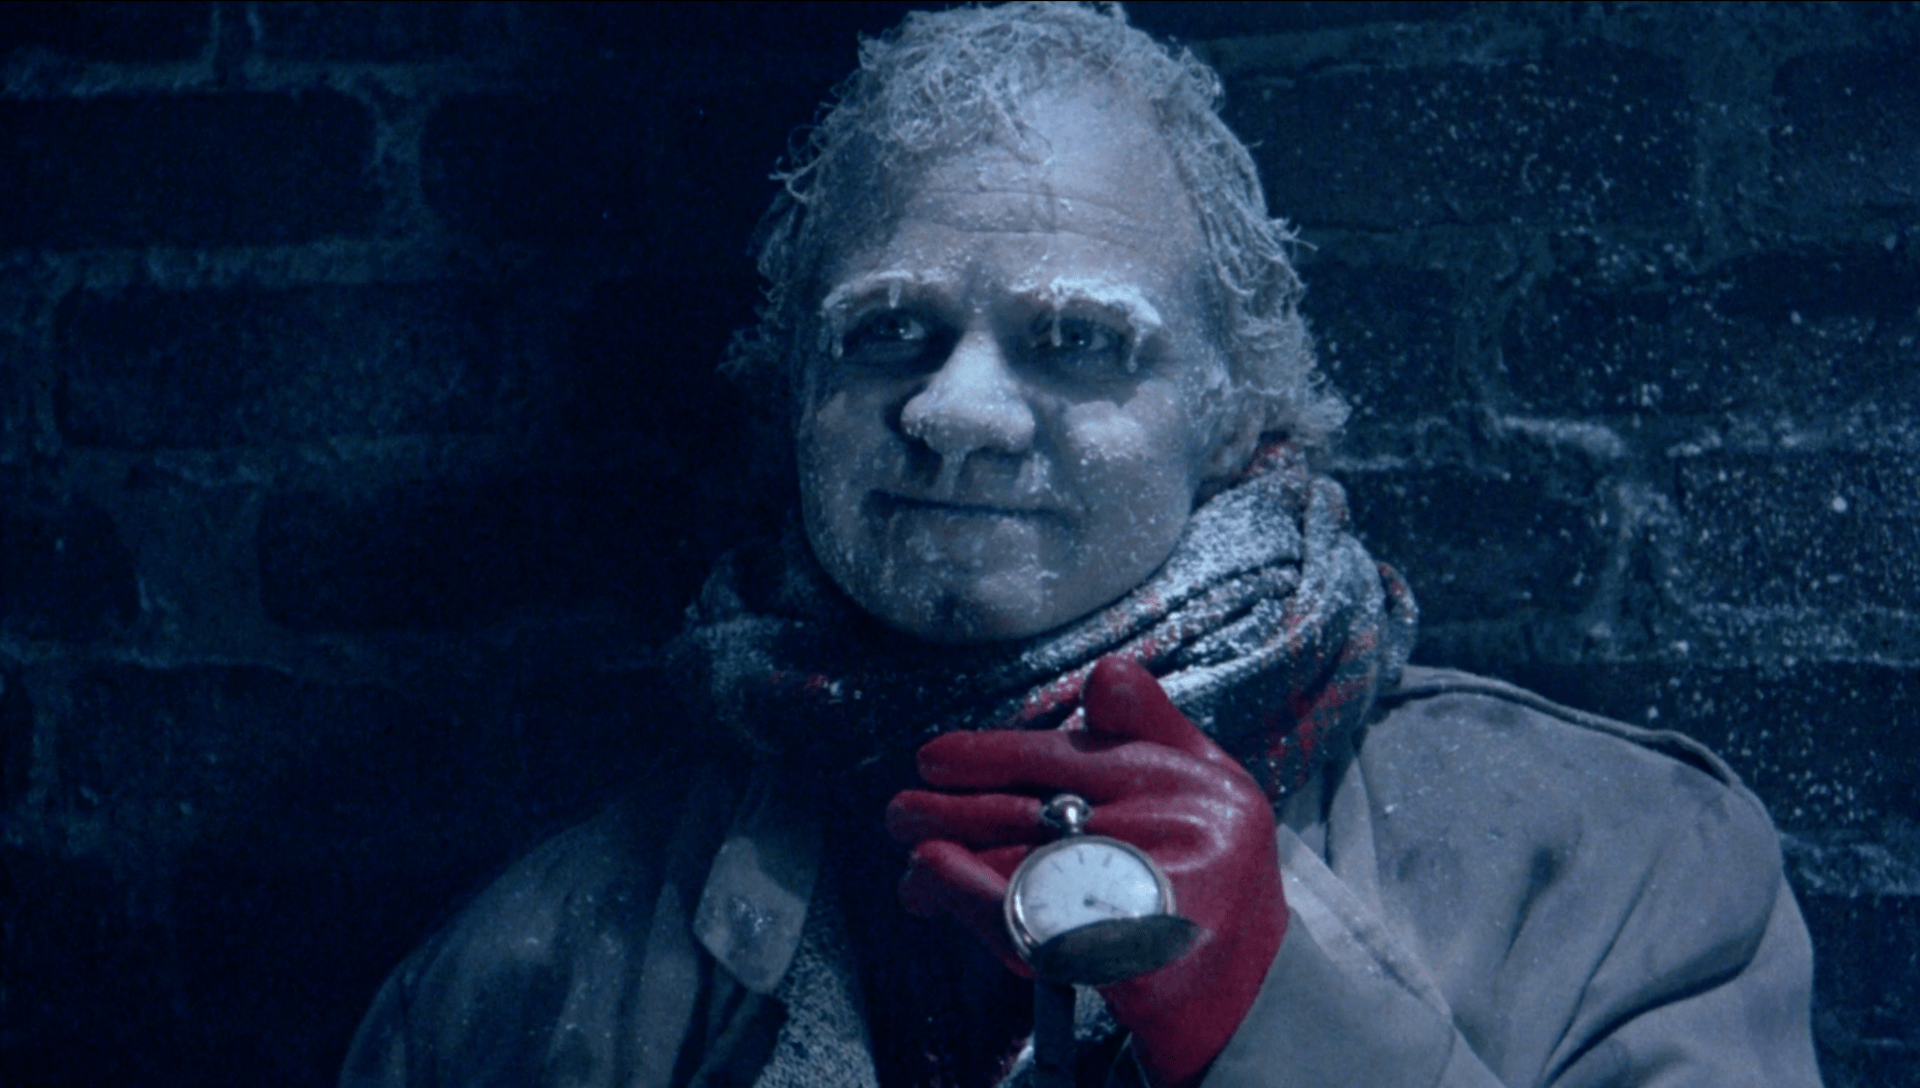 Close-up of Herman, frozen and smiling. Ice is crystalized in his hair and eyebrows. His pocket watch hangs in mid-air from his hand, clothed in a red leather globe.